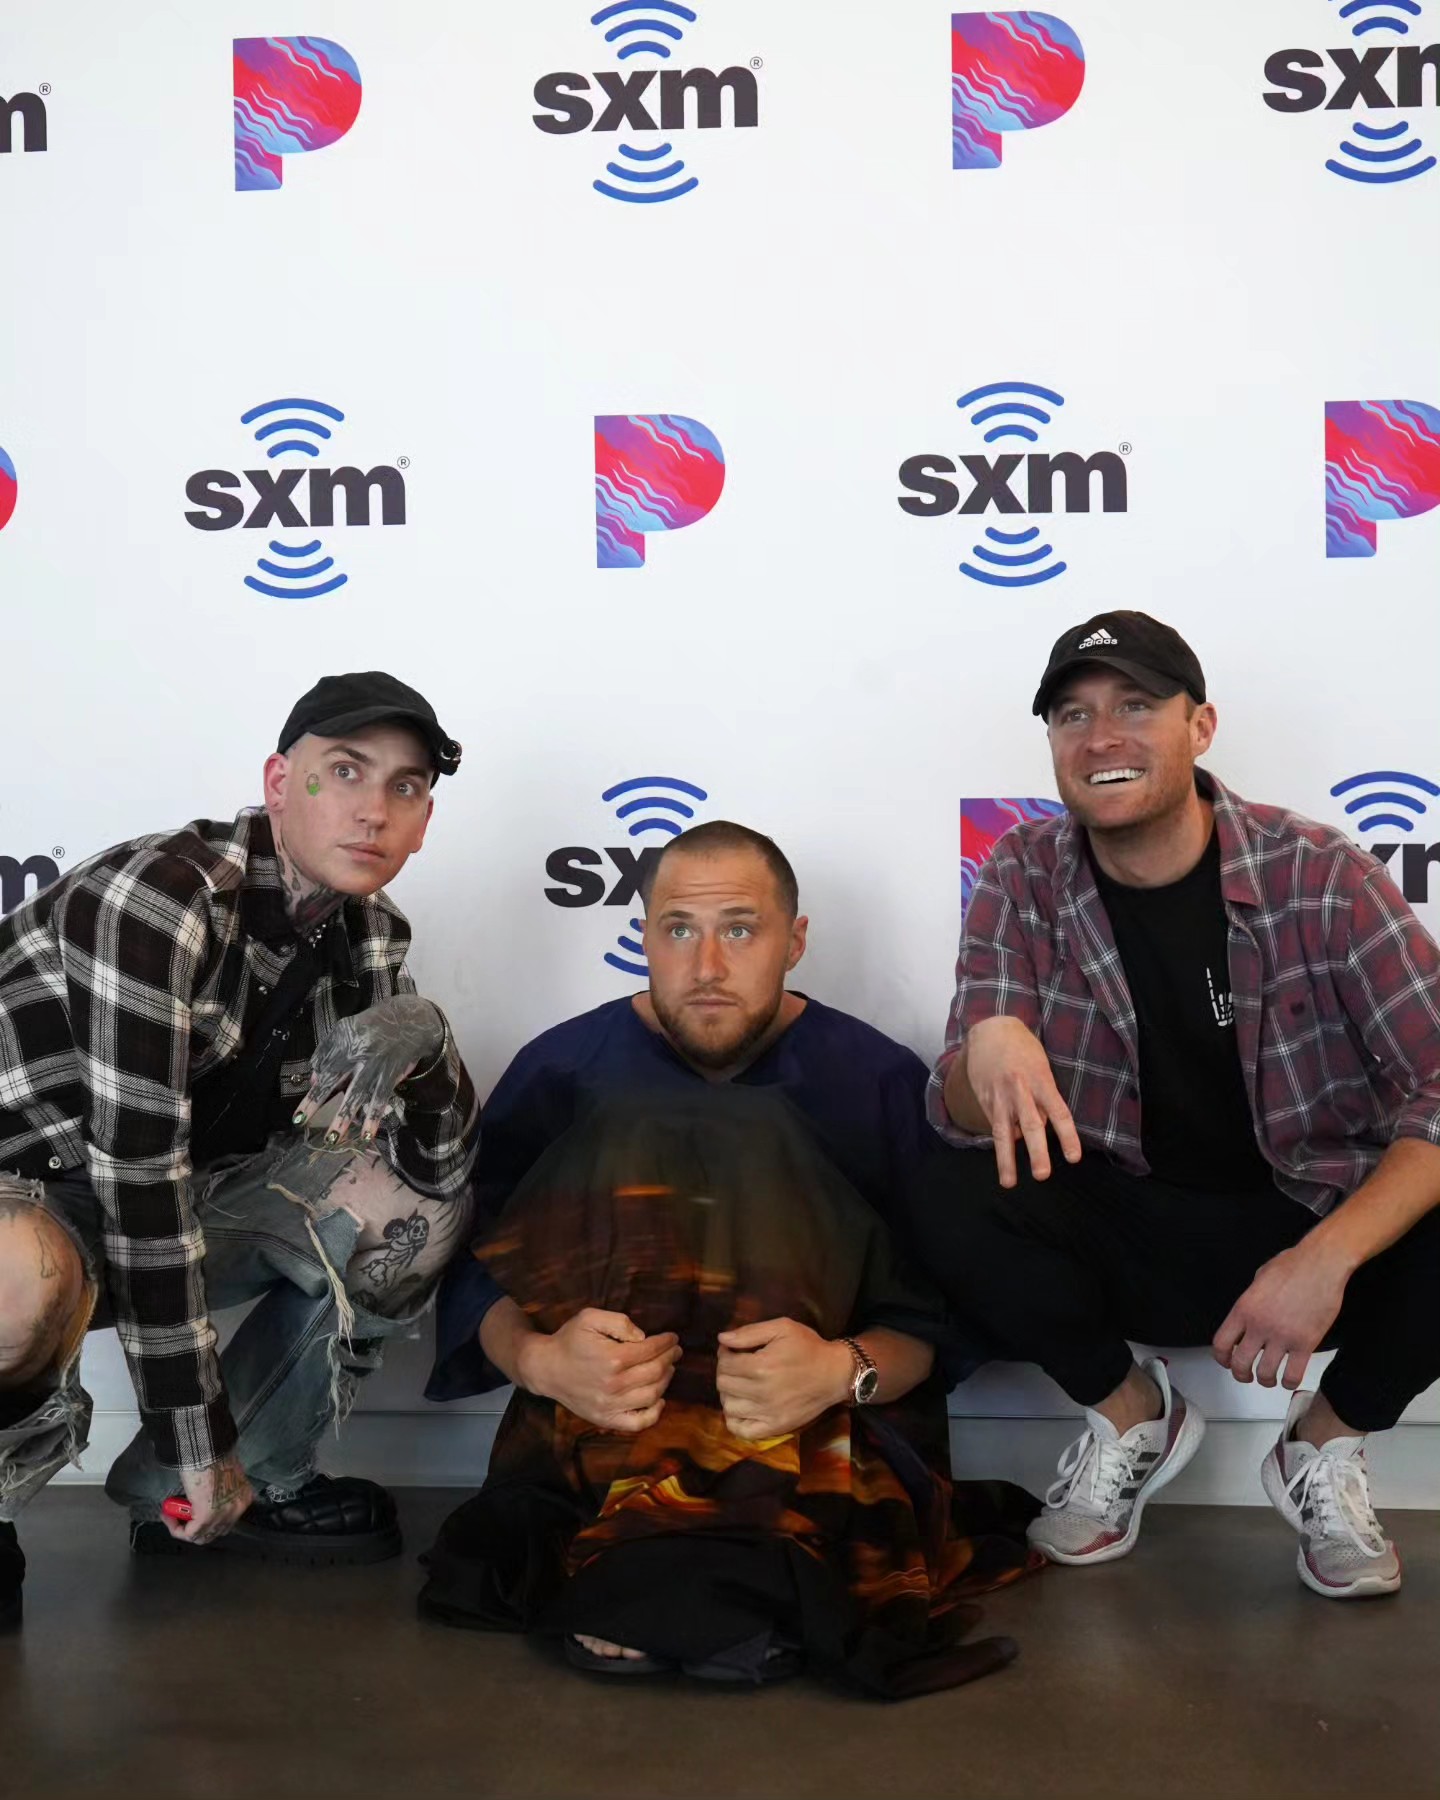 Mike Posner & blackbear at SiriusXM Hist 1 to talk about their new album Mansionz 2.
